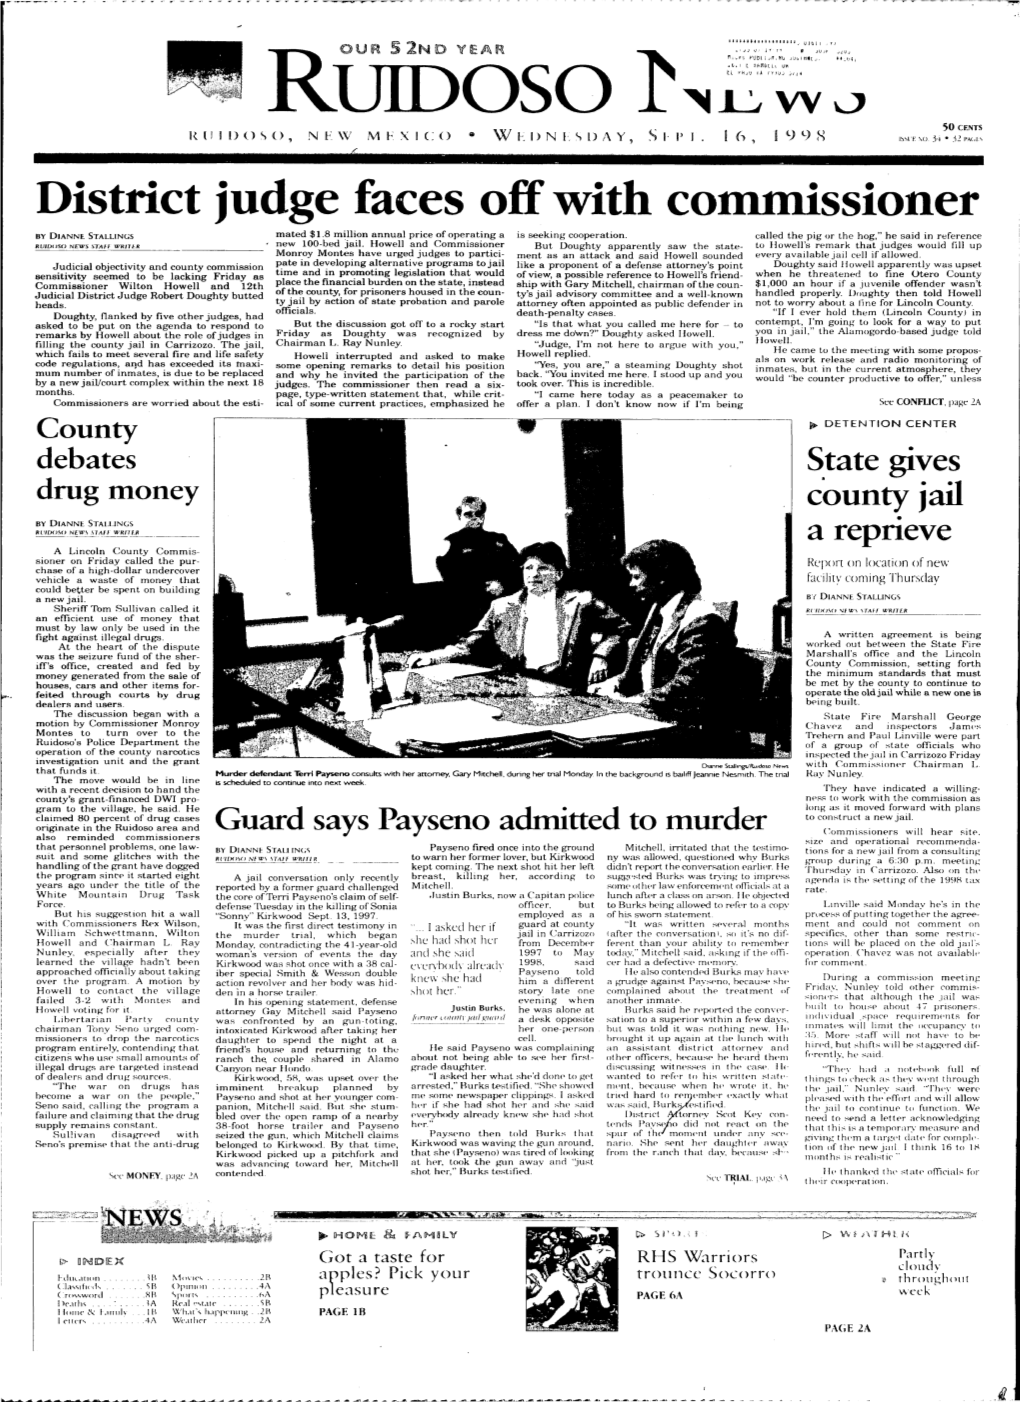 District Judge Faces Off with Commissioner